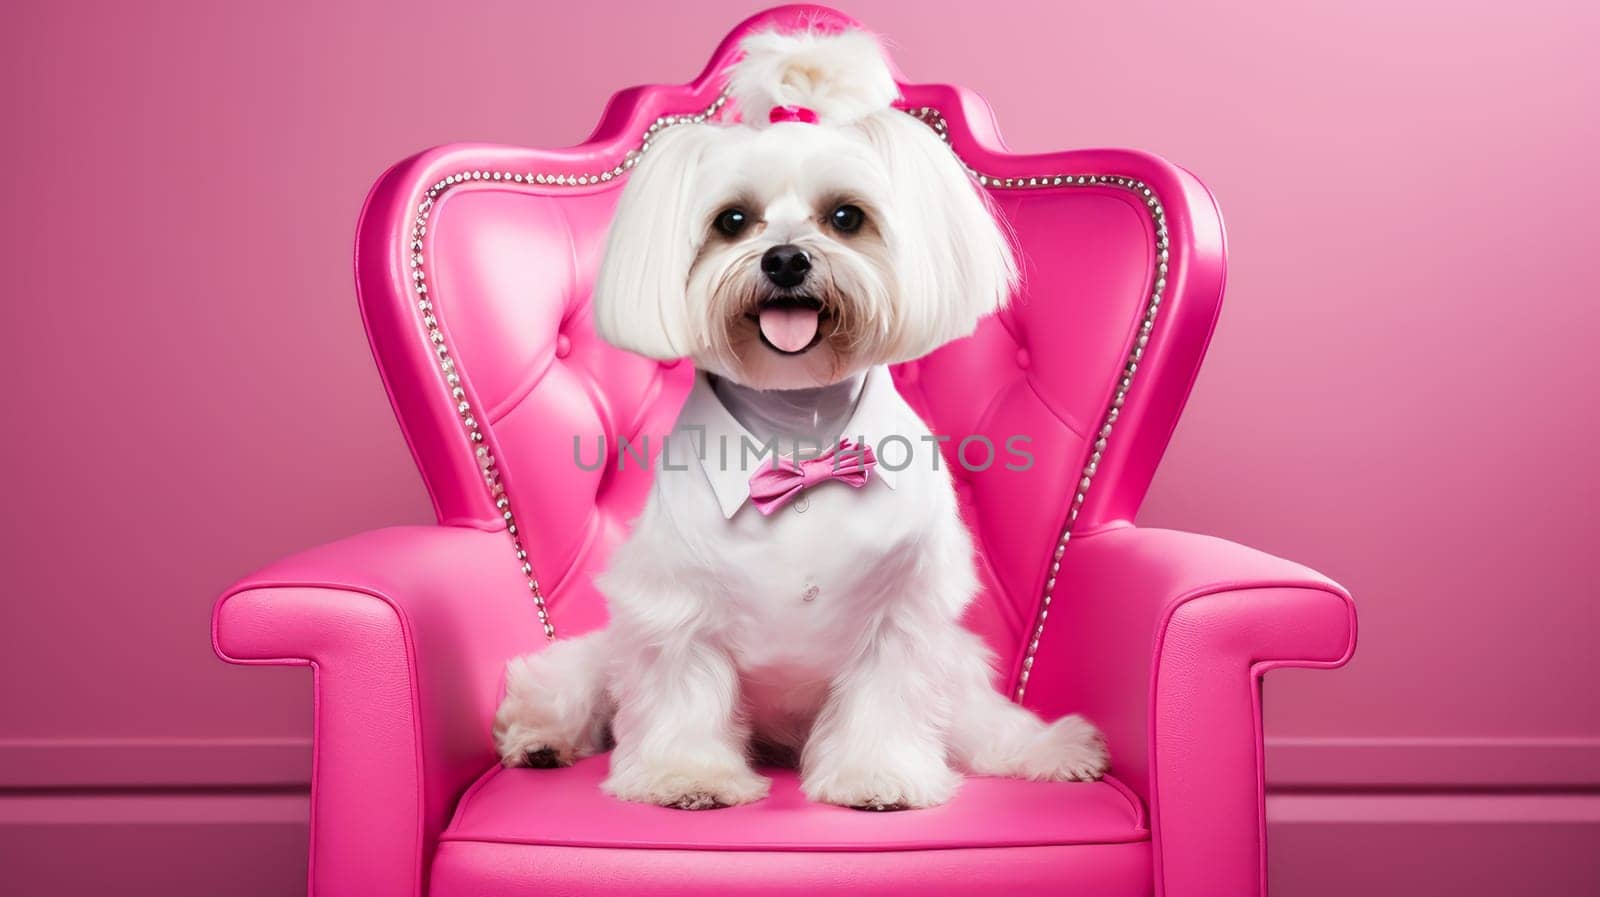 A small dog sits in a chair on a pink background, waiting for its turn for procedures. Animal grooming, grooming, groomer, animal spa, pet store, online store for animals, animal hotel, copy space, boutique.